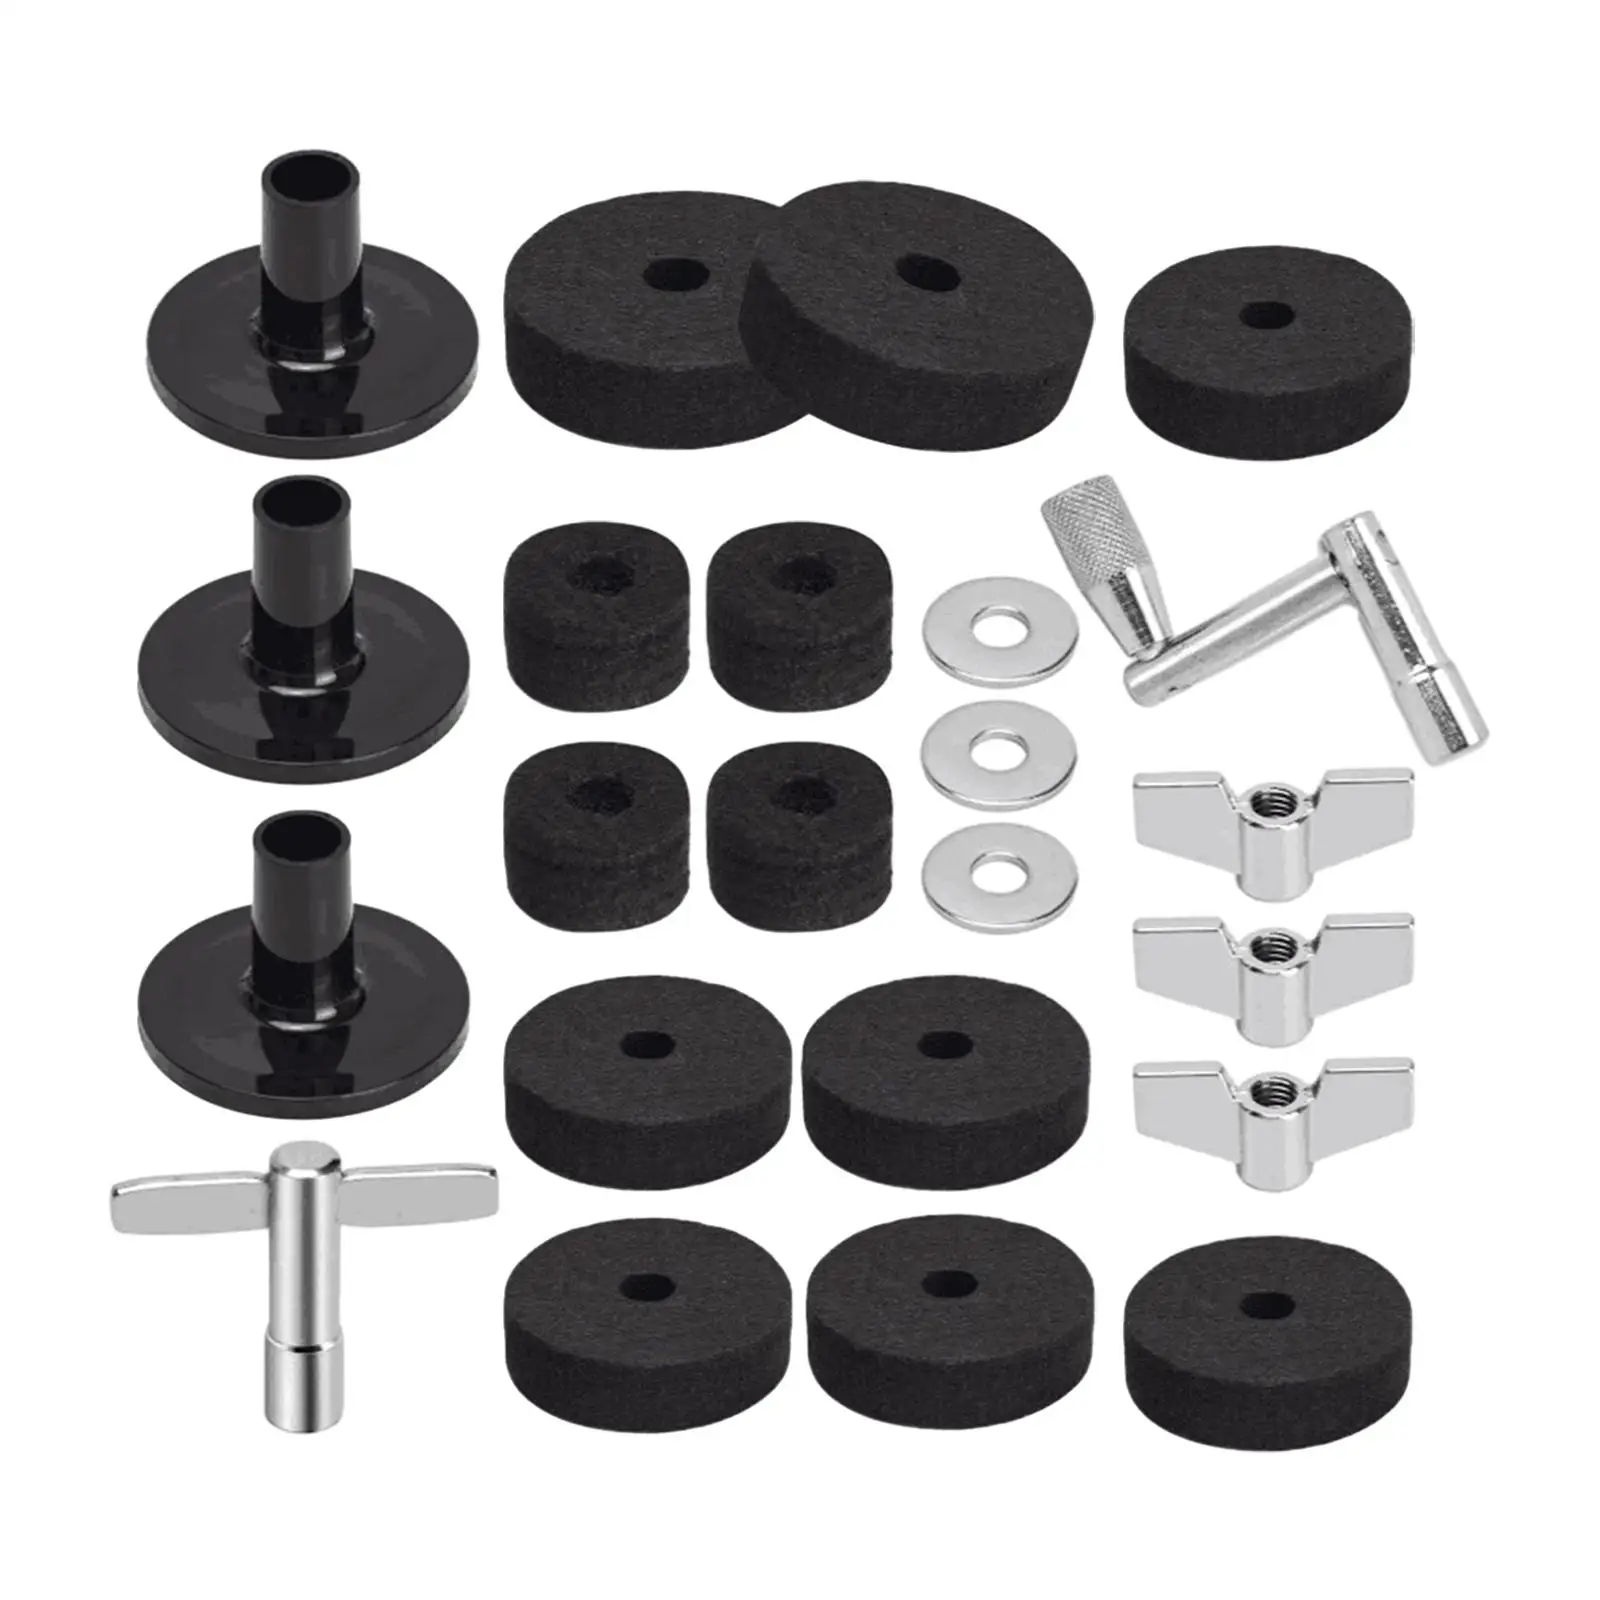 23x Cymbal Sleeve and Felt Washers for Shelf Drum Kits Cymbal Replacement